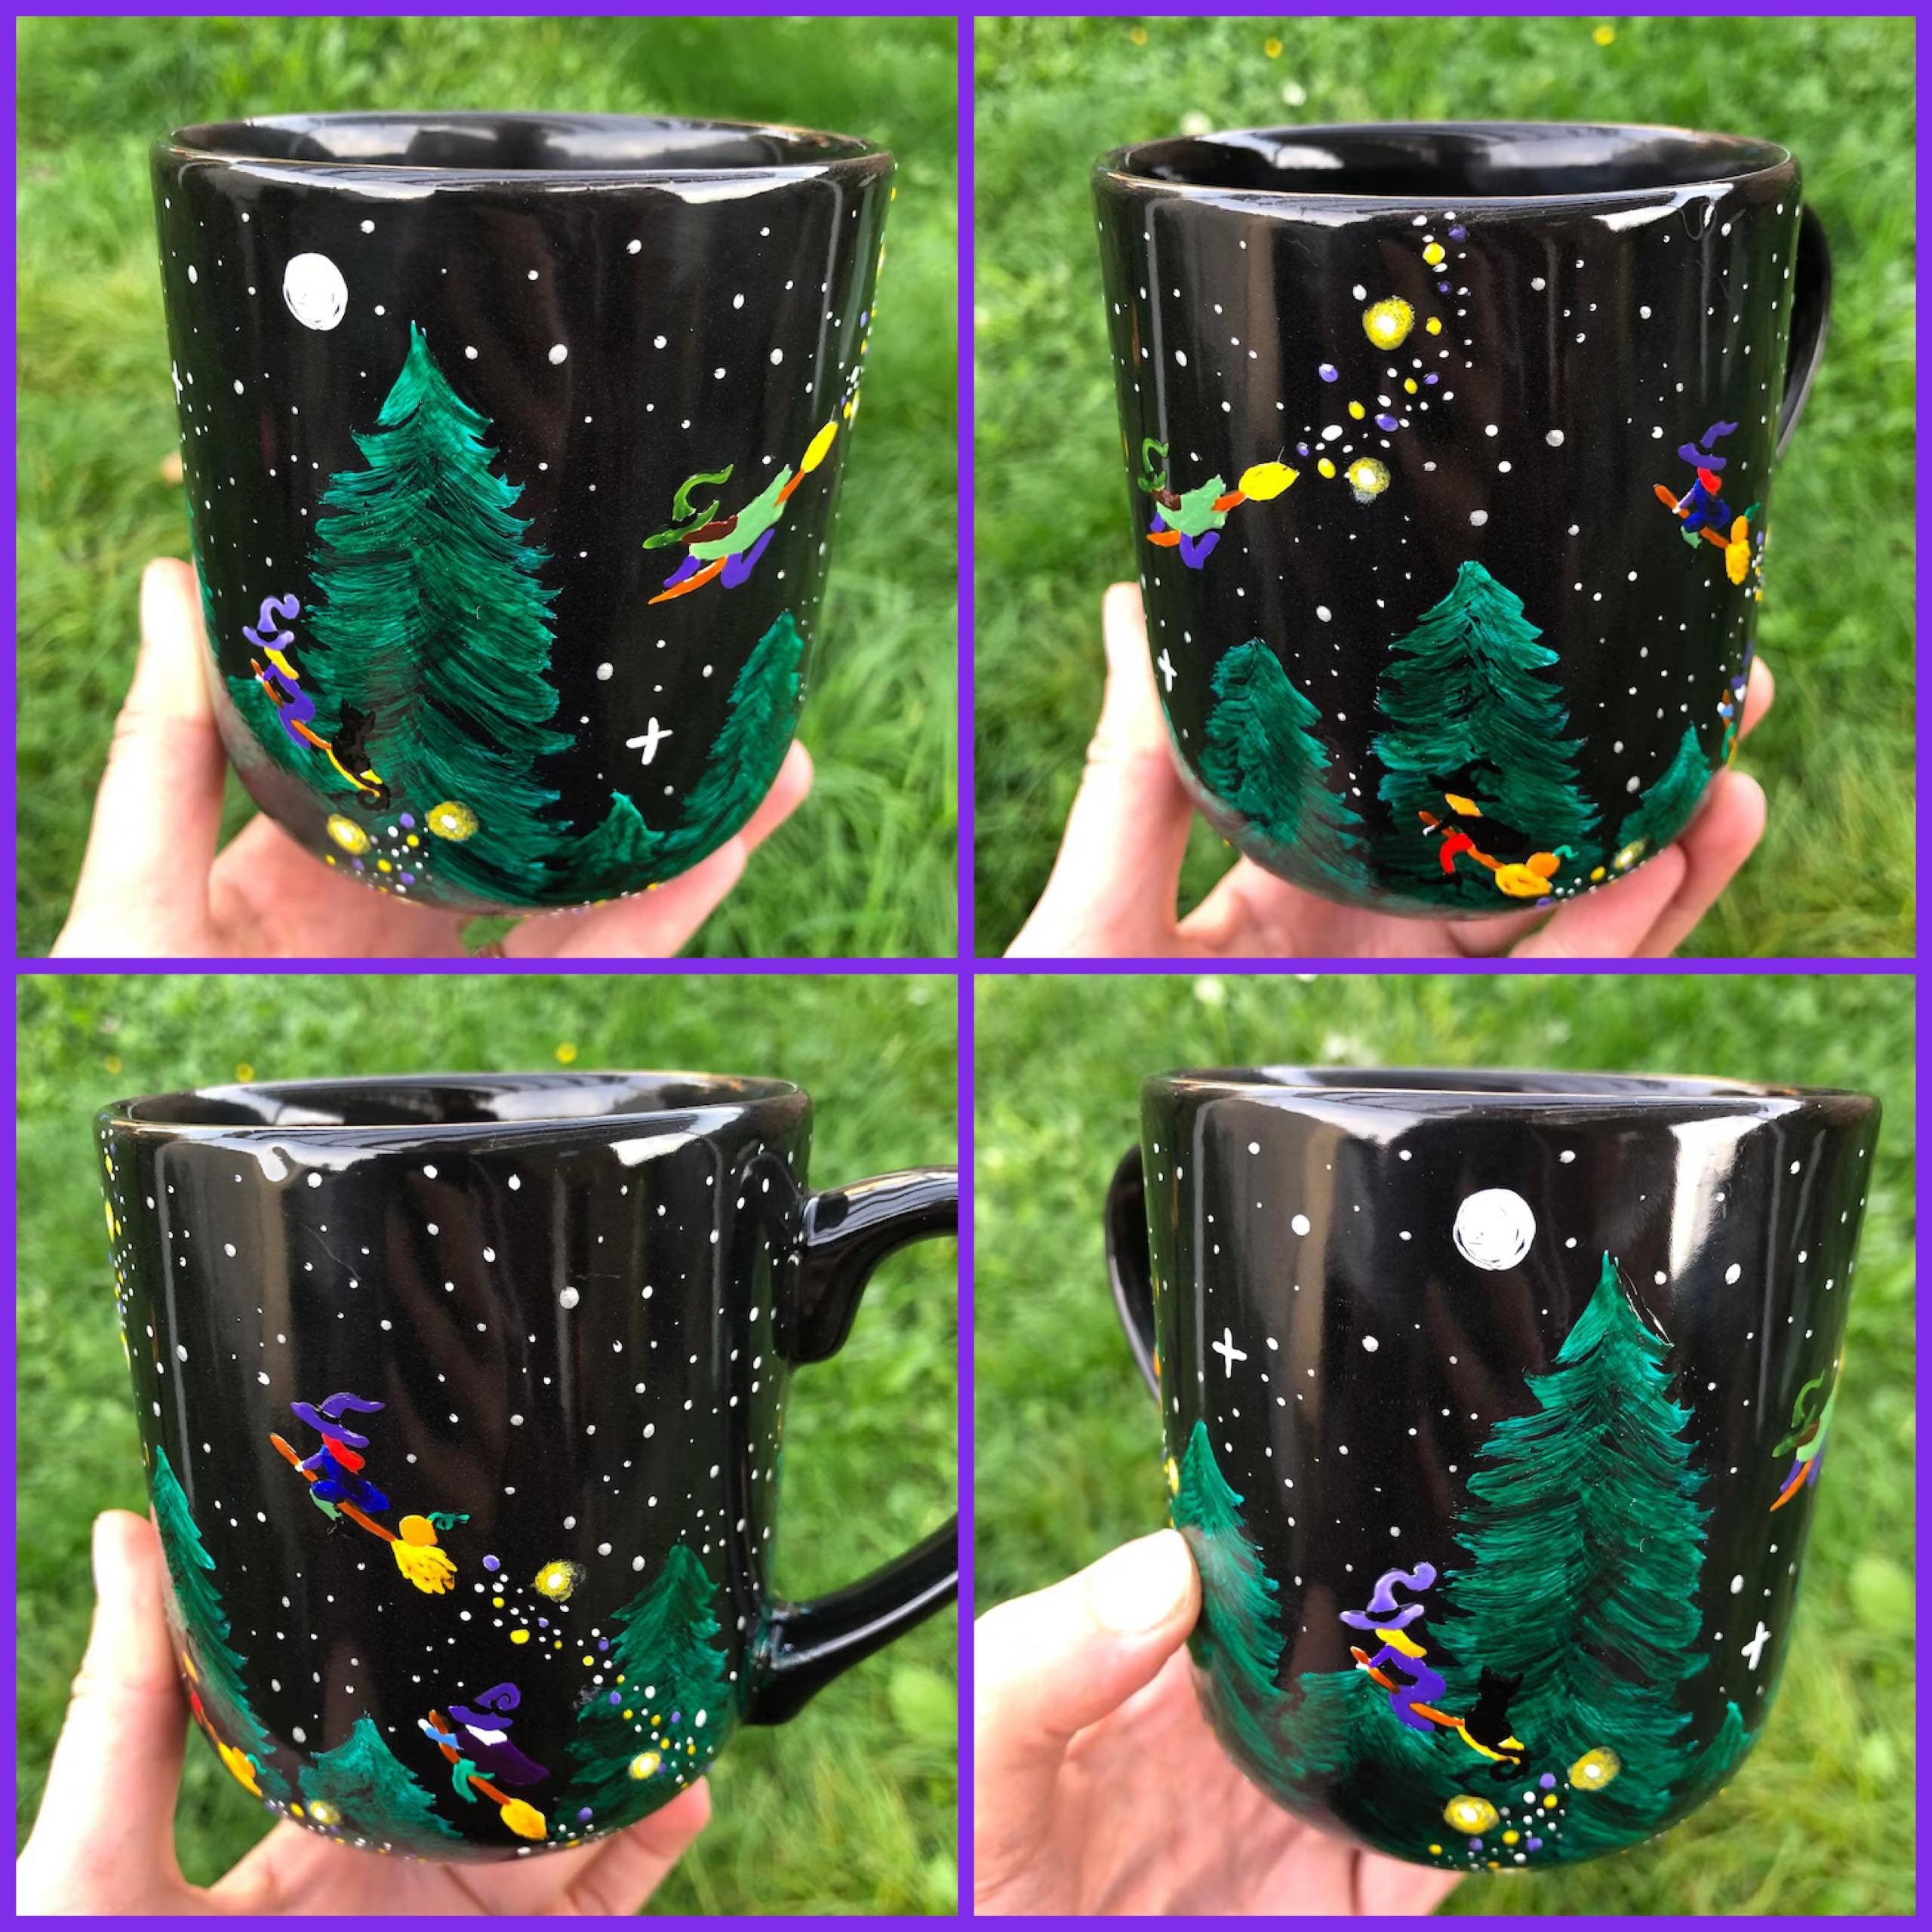 The Night of the Witches Mug Hand Painted Artisanal 